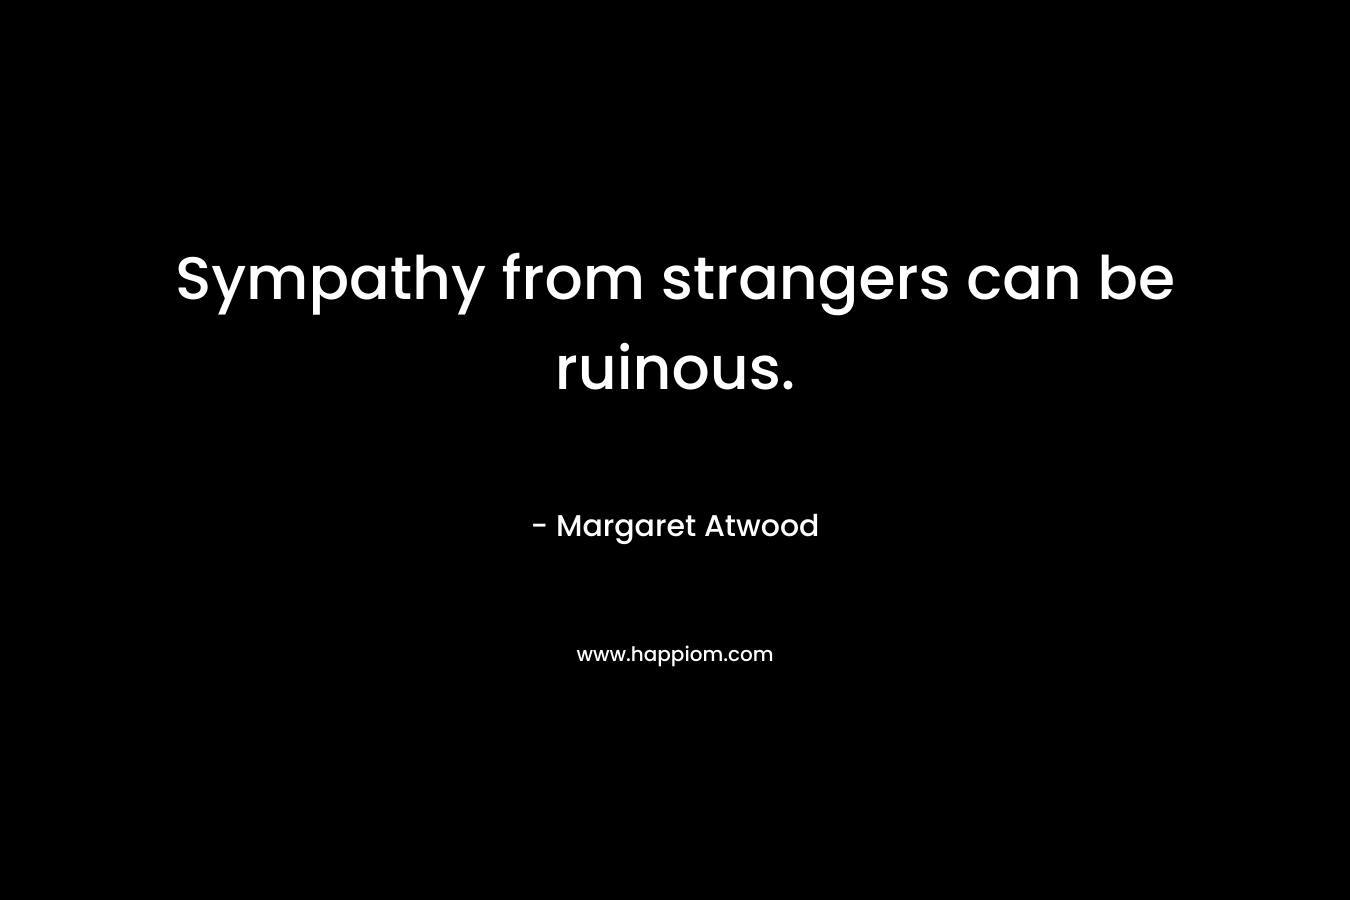 Sympathy from strangers can be ruinous.